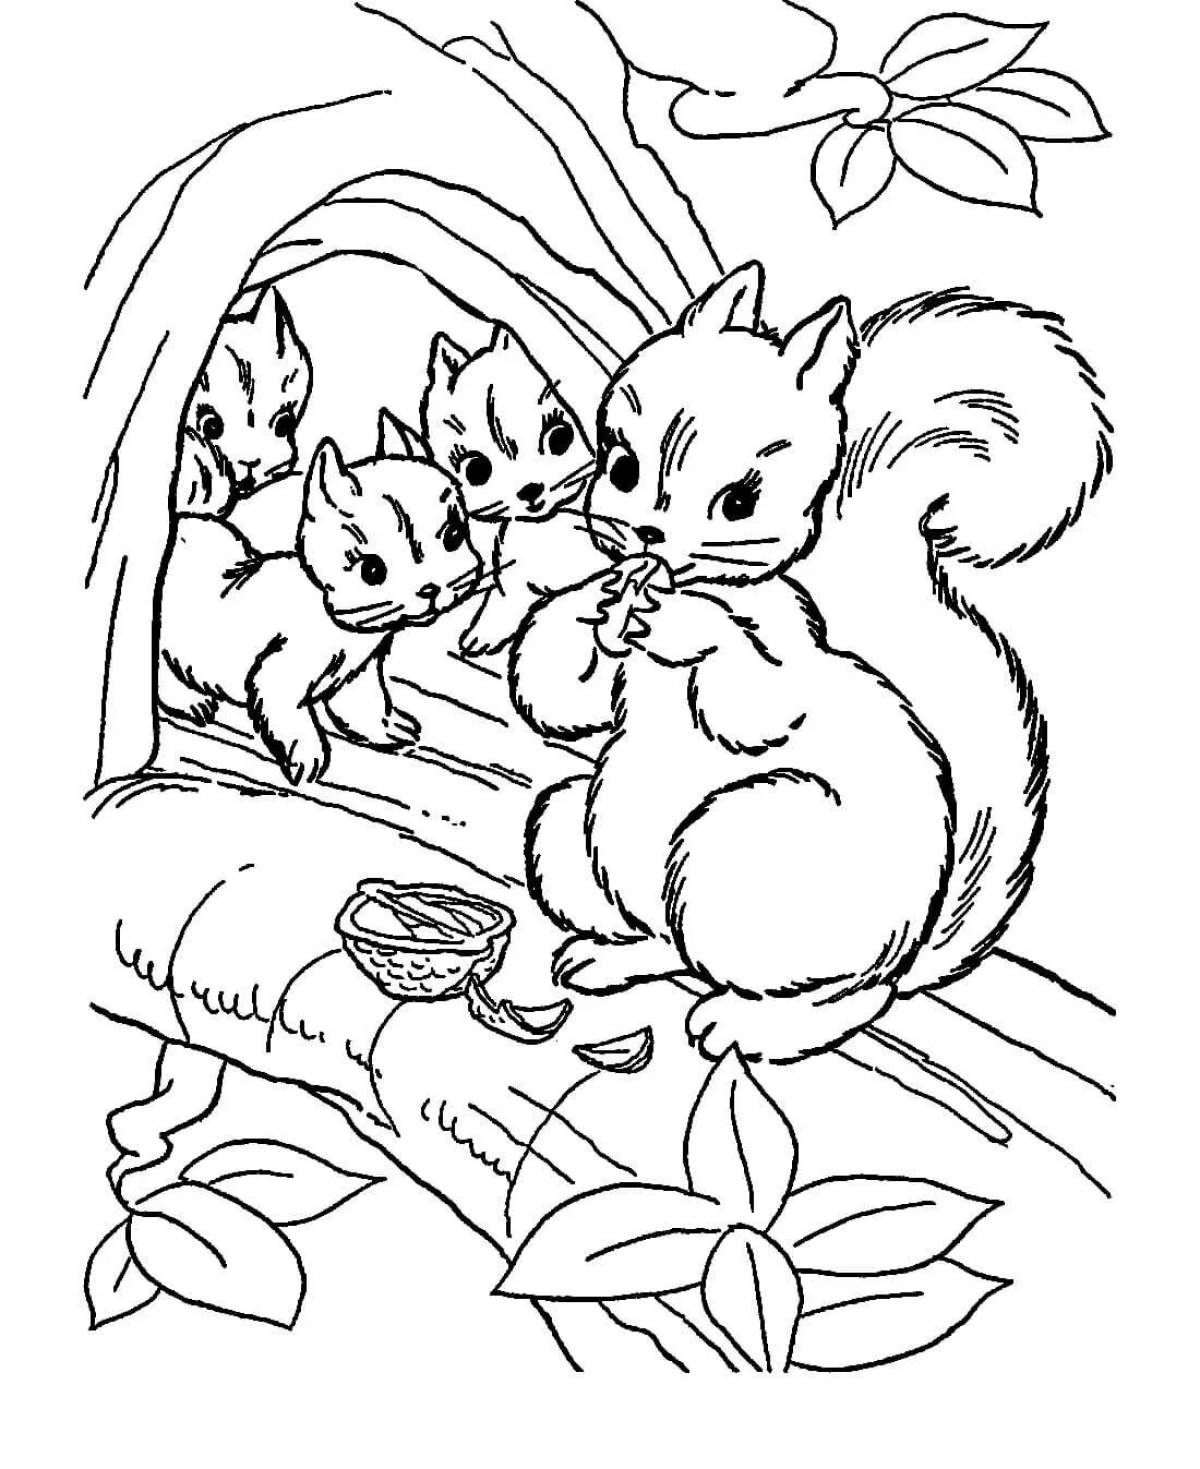 Radiant squirrel coloring book for children 2-3 years old